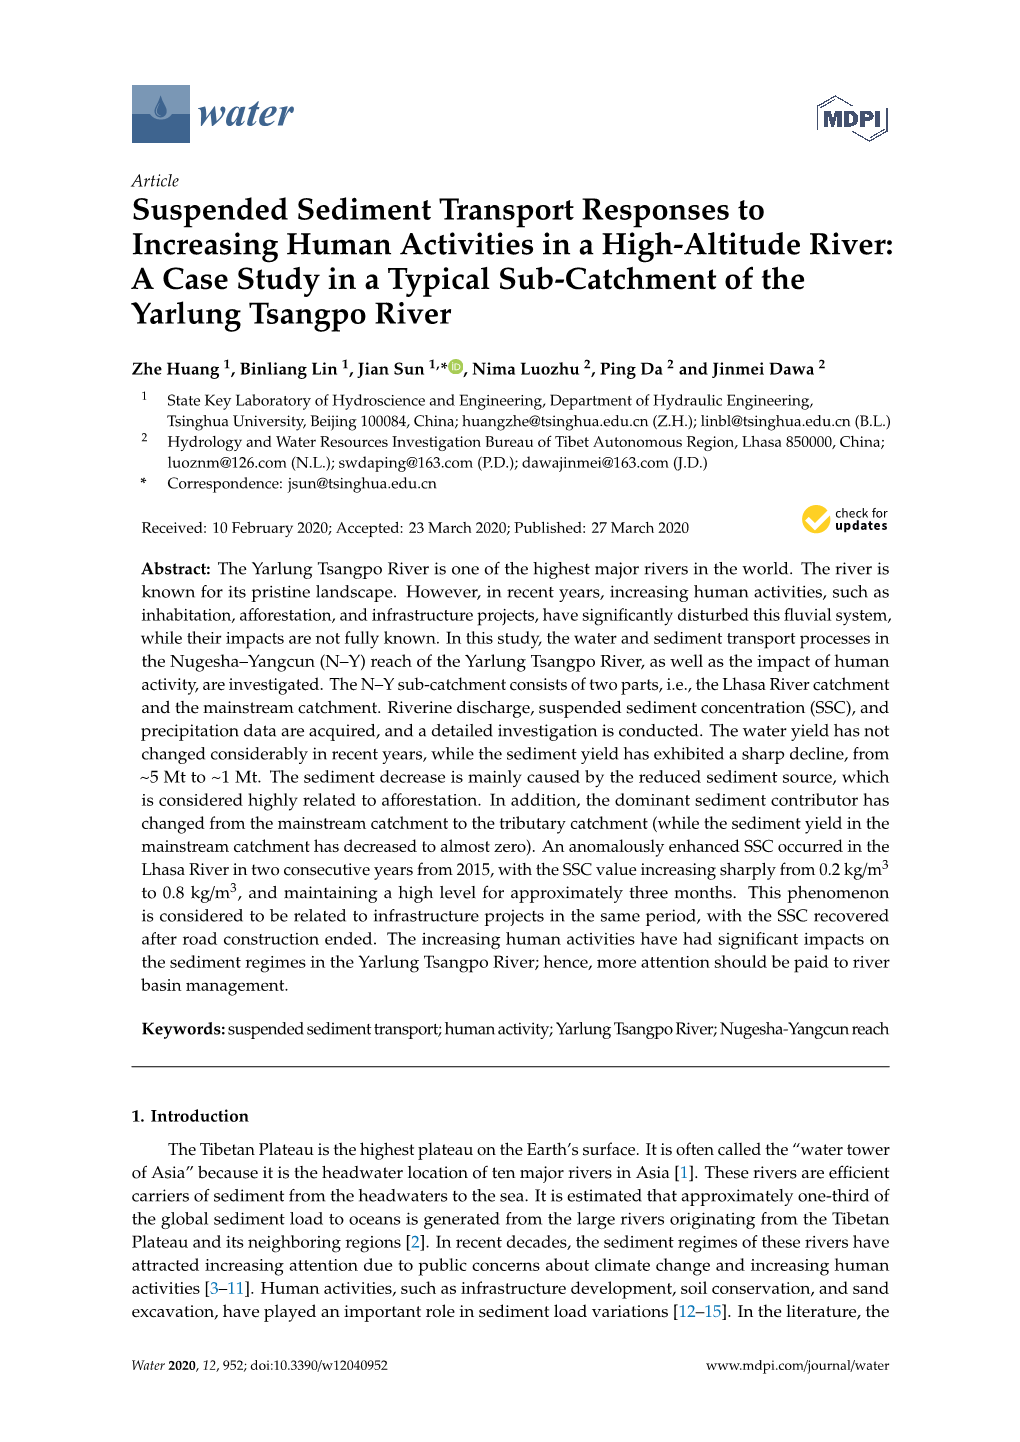 Suspended Sediment Transport Responses to Increasing Human Activities in a High-Altitude River: a Case Study in a Typical Sub-Catchment of the Yarlung Tsangpo River